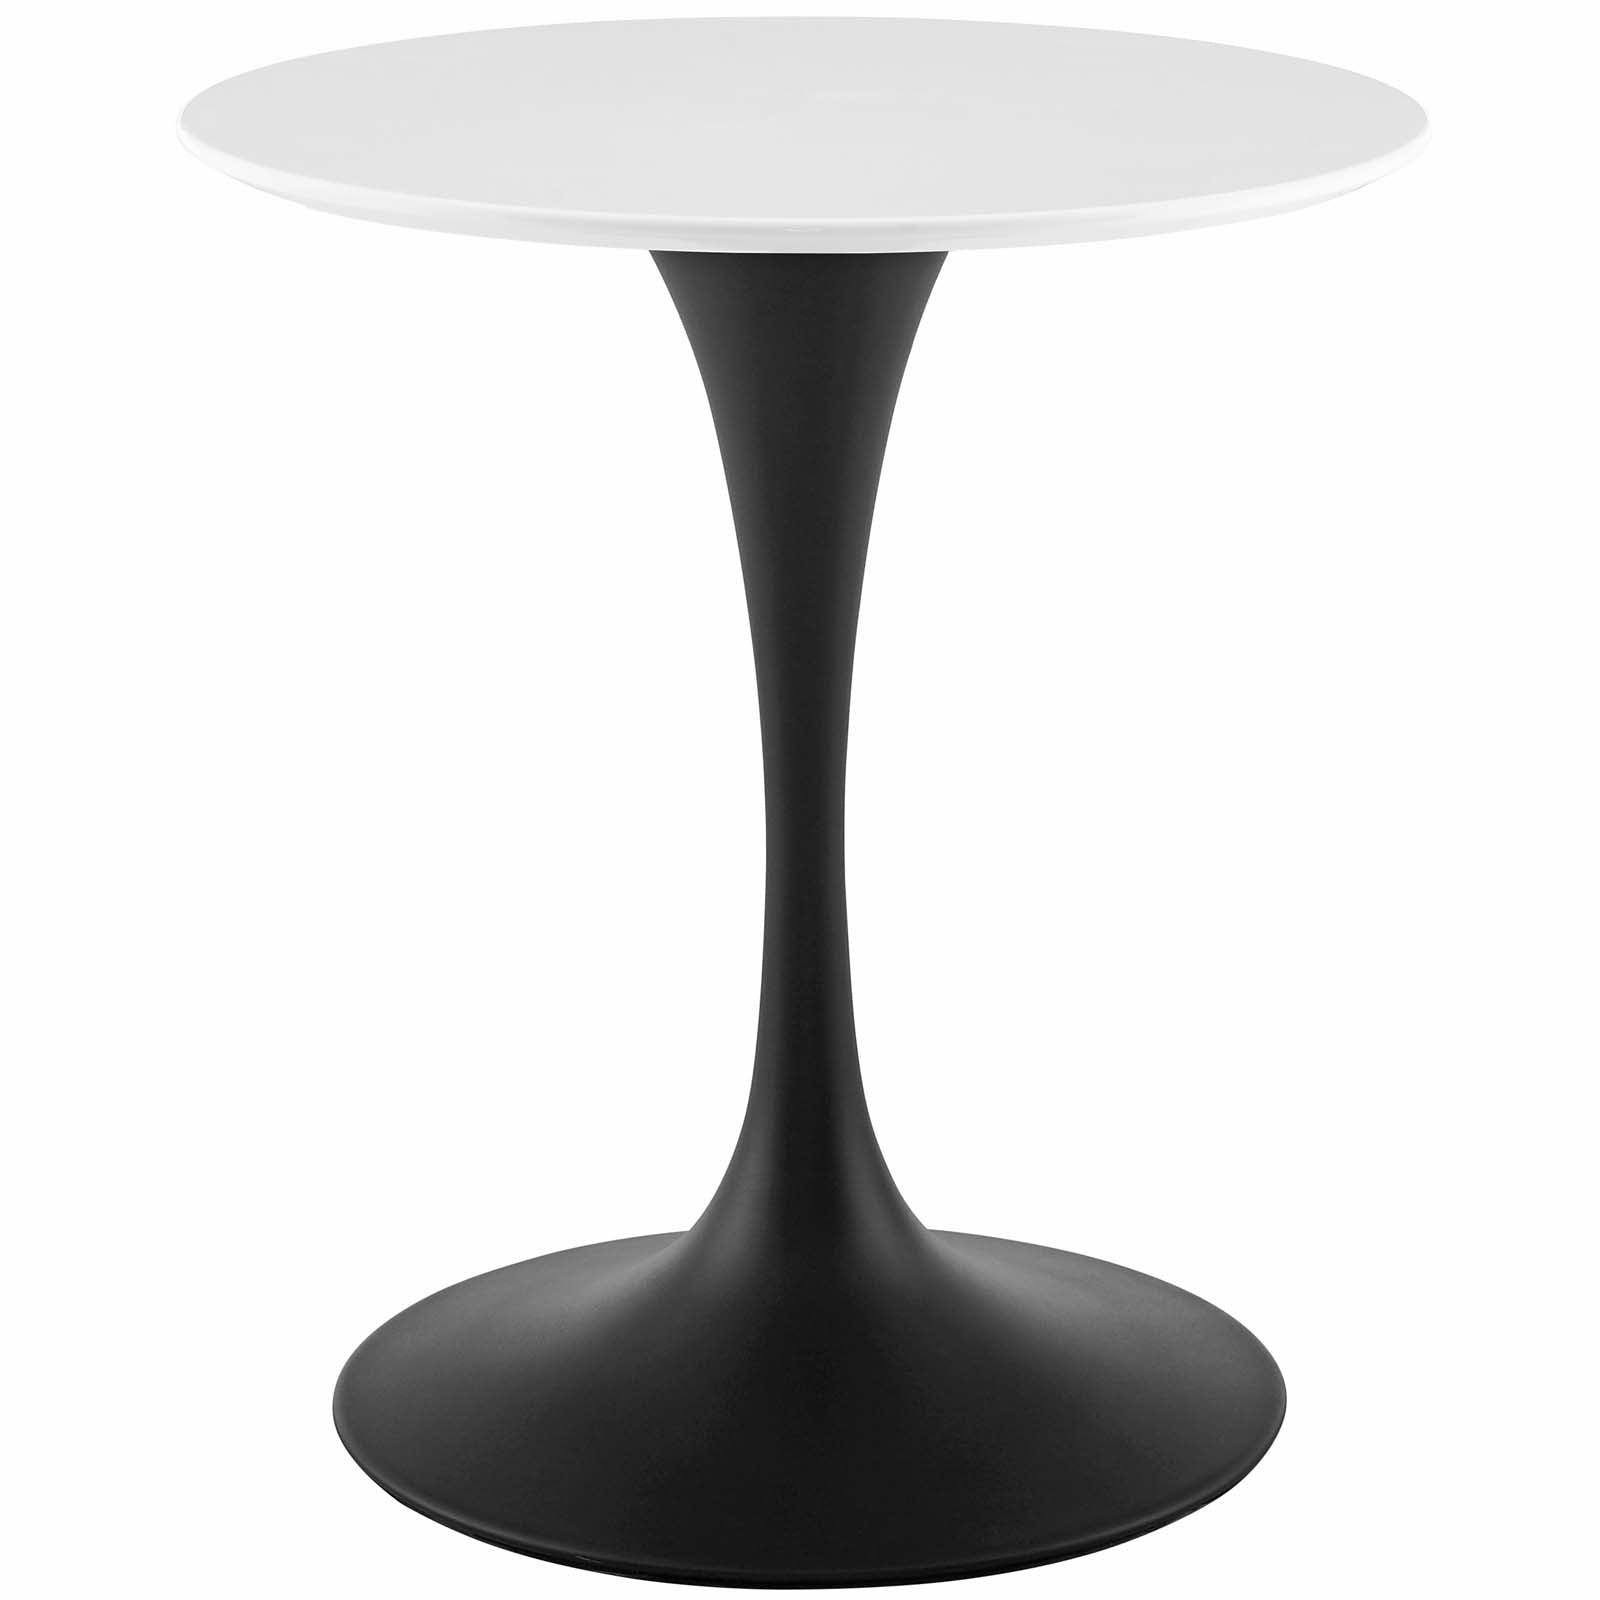 Lippa 28" Round Wood Dining Table - East Shore Modern Home Furnishings